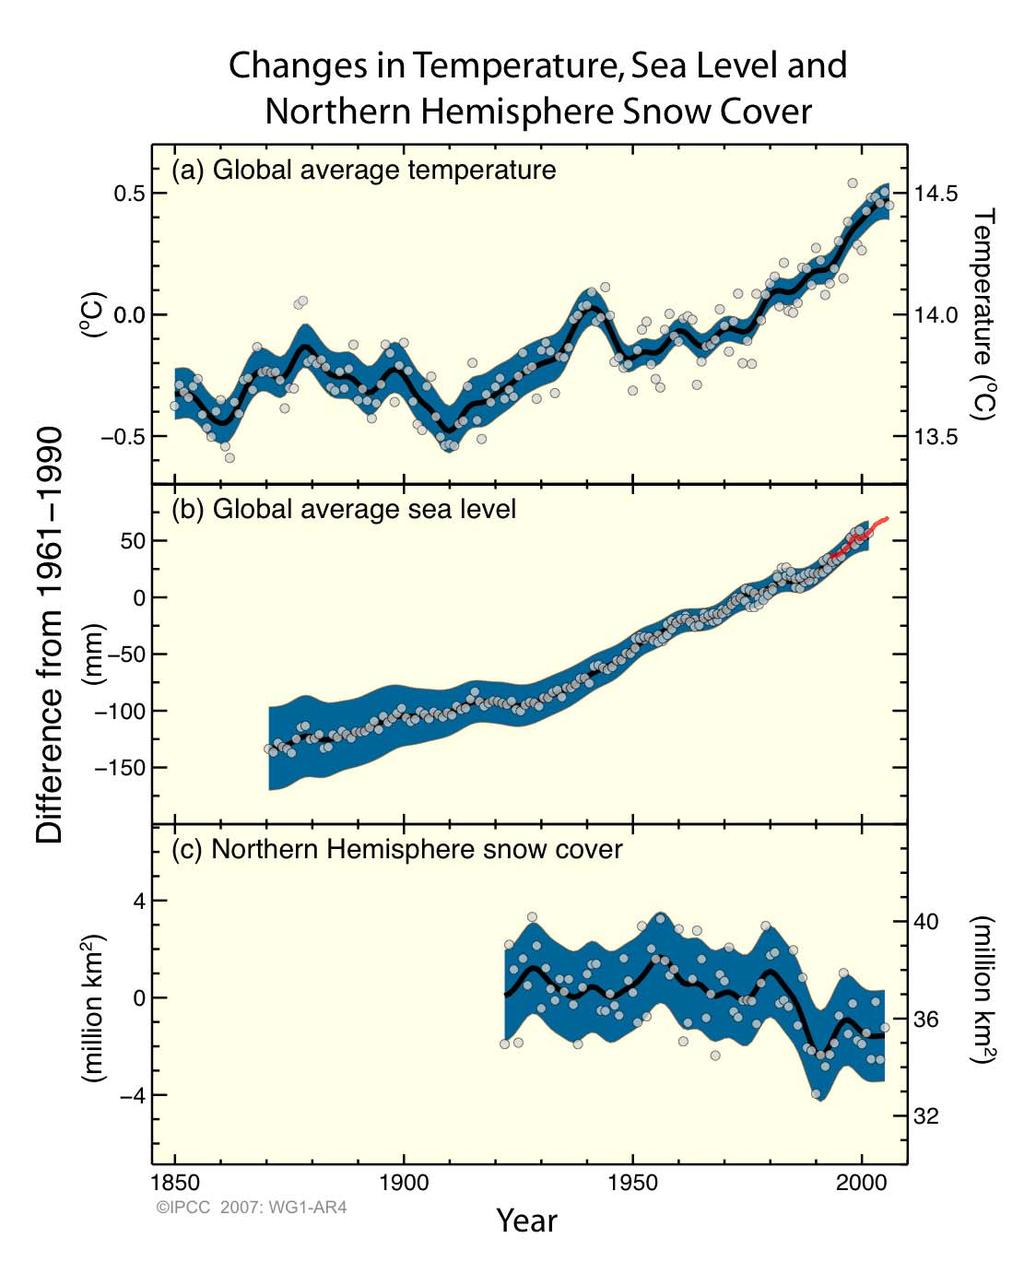 HOW HAVE GLOBAL TEMPERATURE & SEA LEVEL, & N.H.SNOW COVER CHANGED OVER THE PAST 150 YEARS?